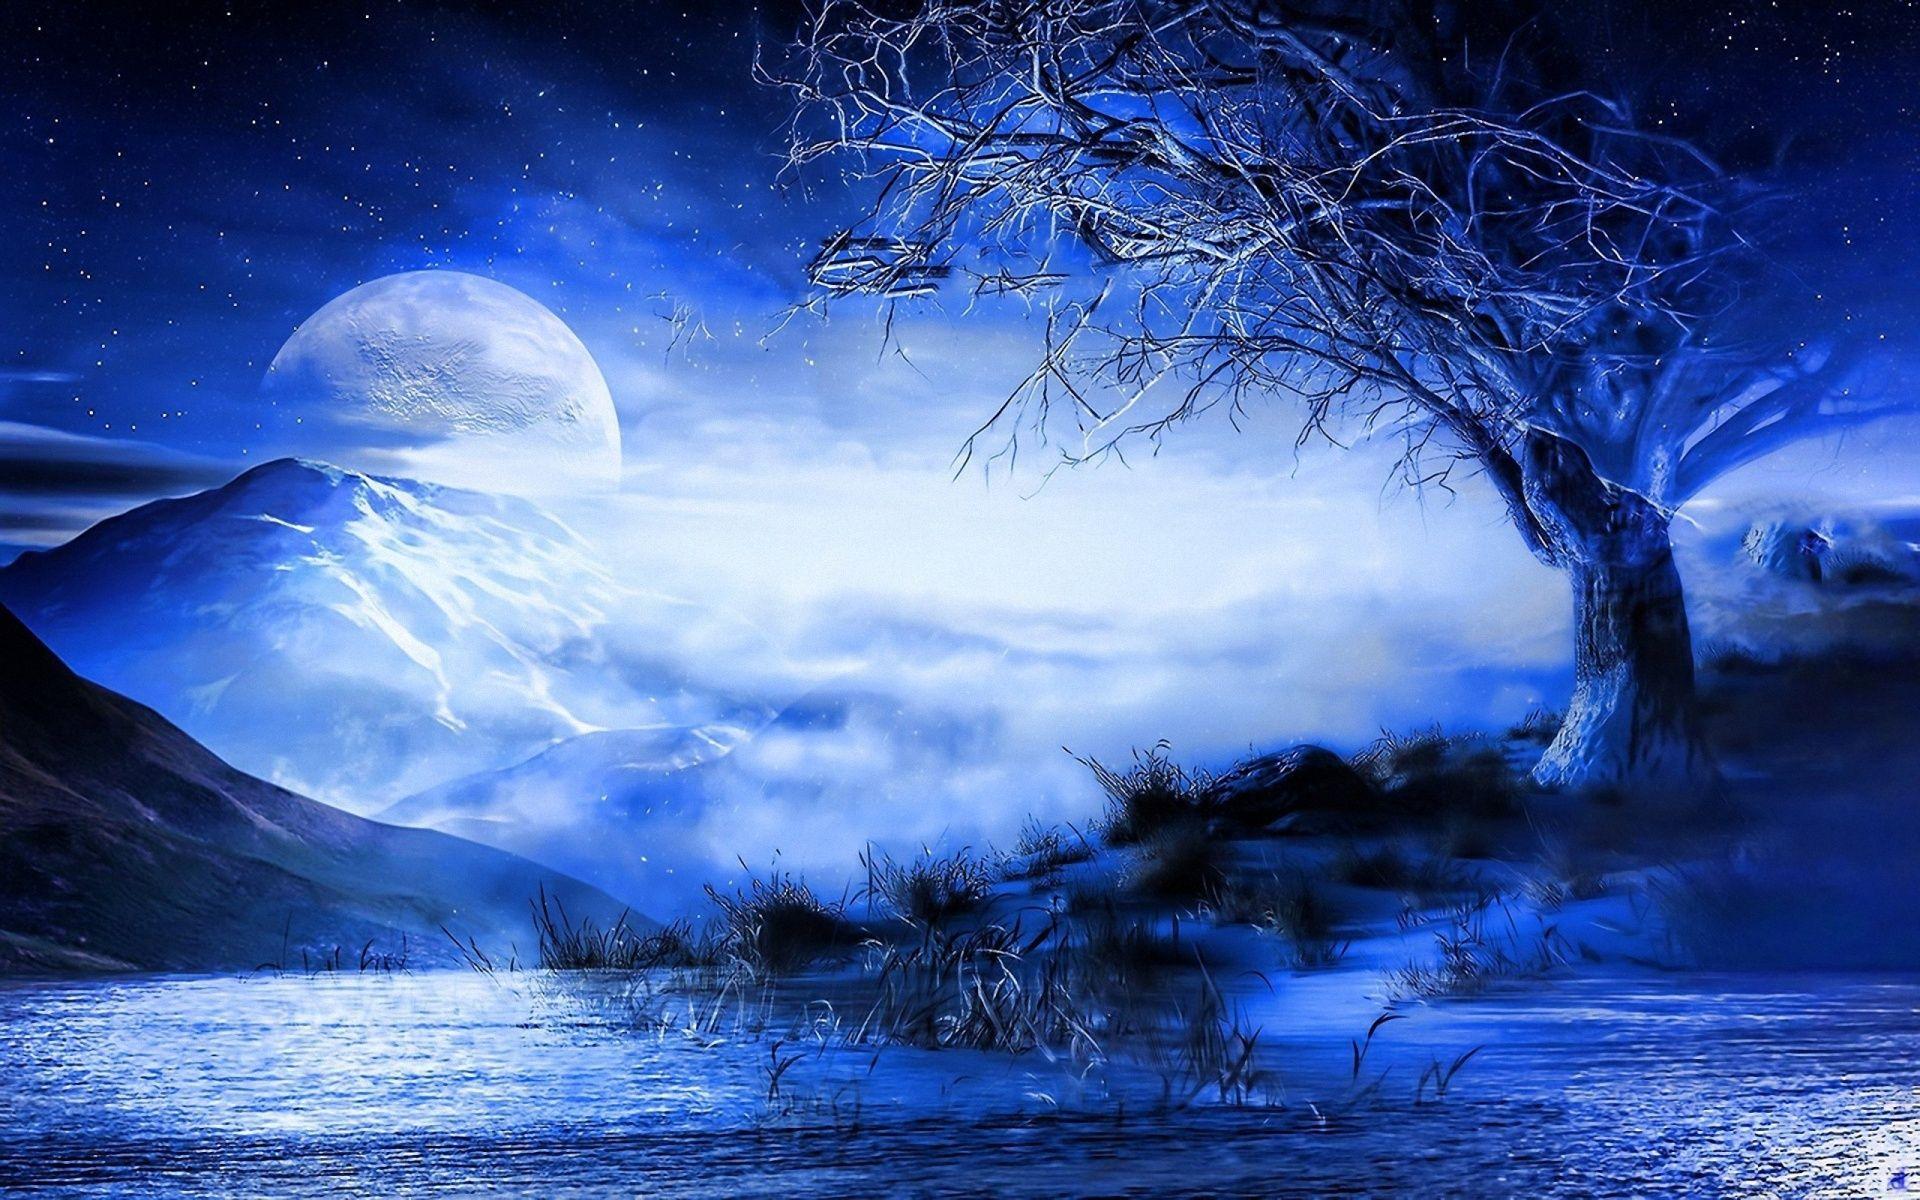 Blue Moon Mountain Wallpapers - Top Free Blue Moon Mountain Backgrounds